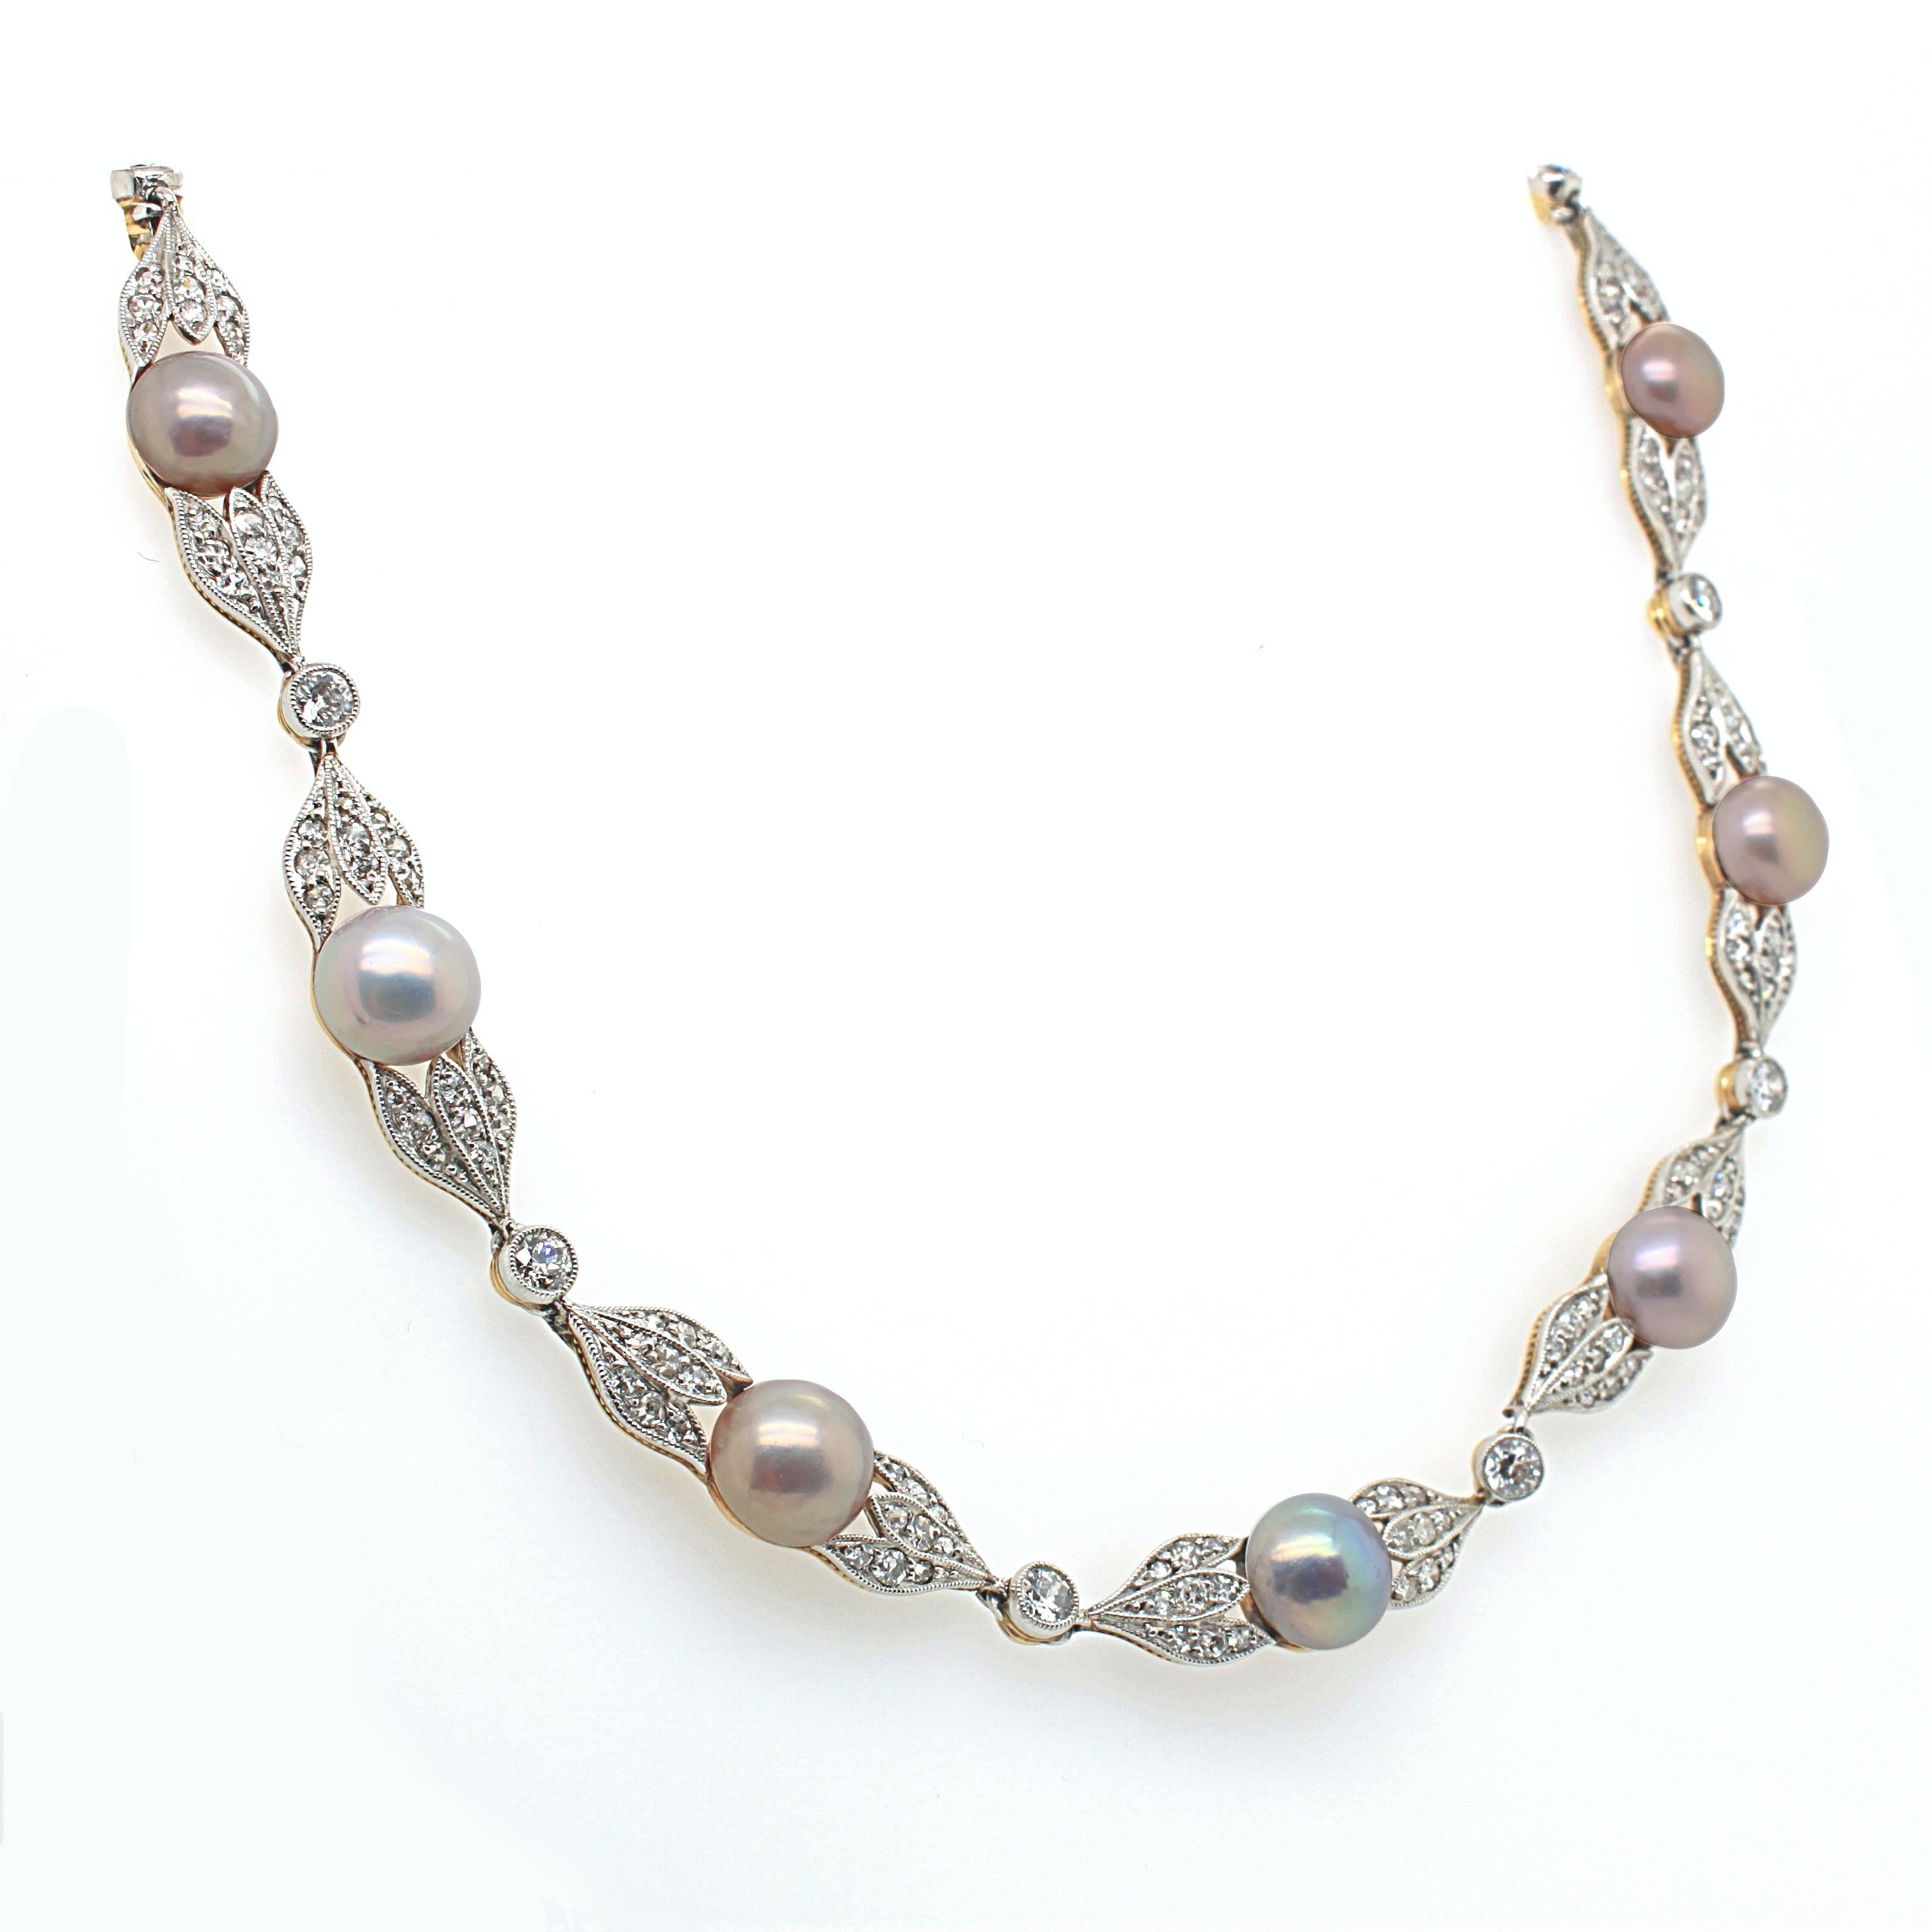 A colourful natural pearl and diamond necklace, Edwardian, ca. 1900. The necklace consists of 16 panels, each set with a natural pearl button and old cut diamonds, weighing approximately 5 carats in total. The natural pearls are multicoloured with